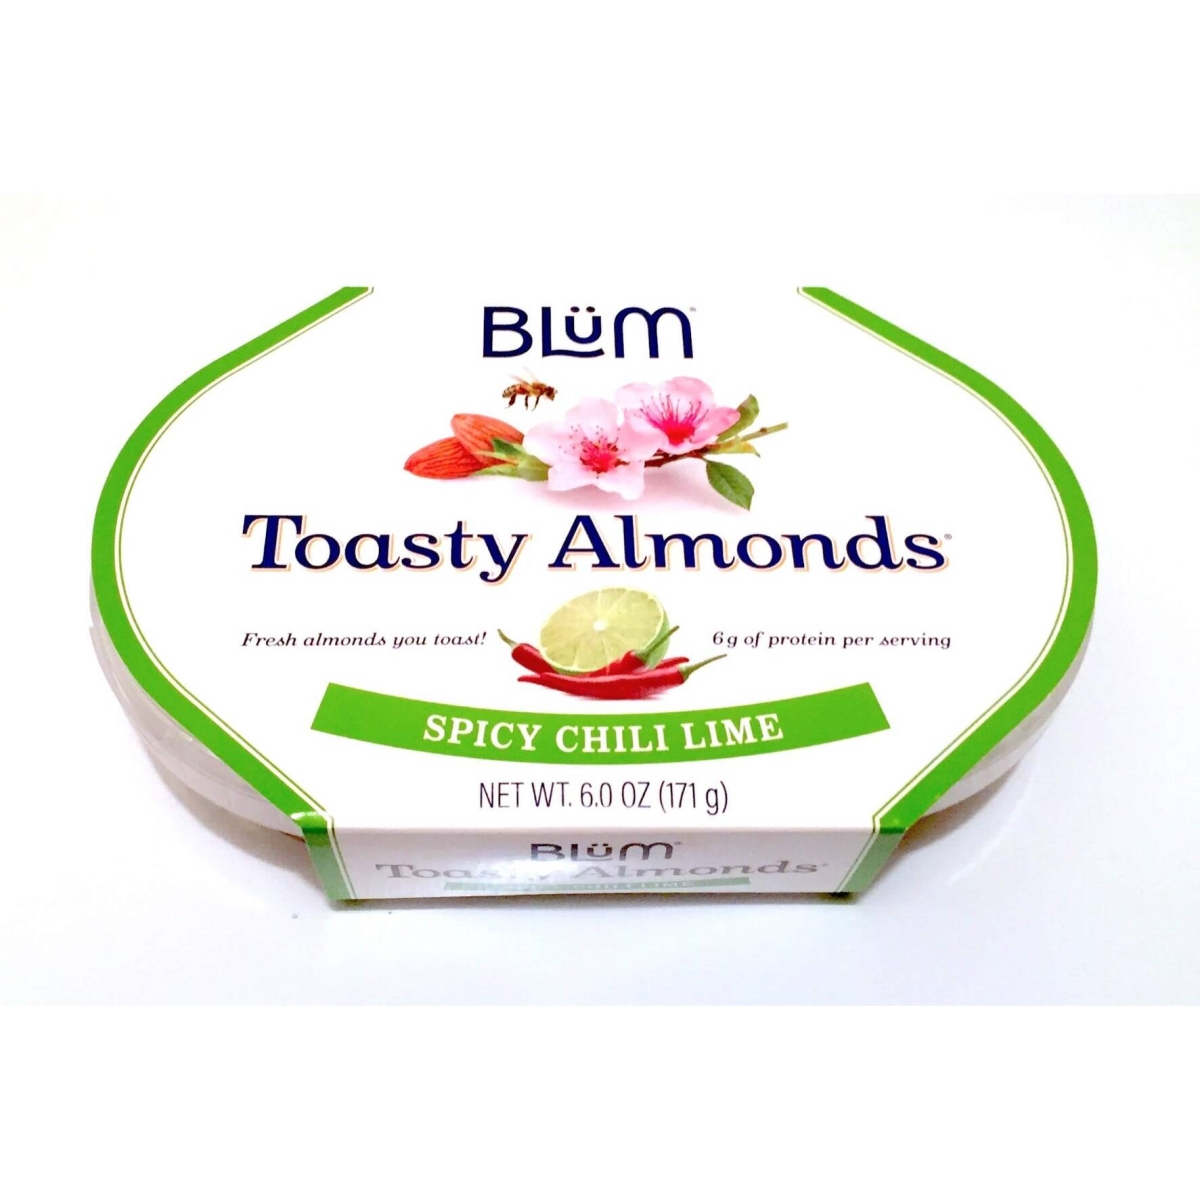 Picture of Blum KHRM02200958 6 oz Spicy Chili Lime Almonds